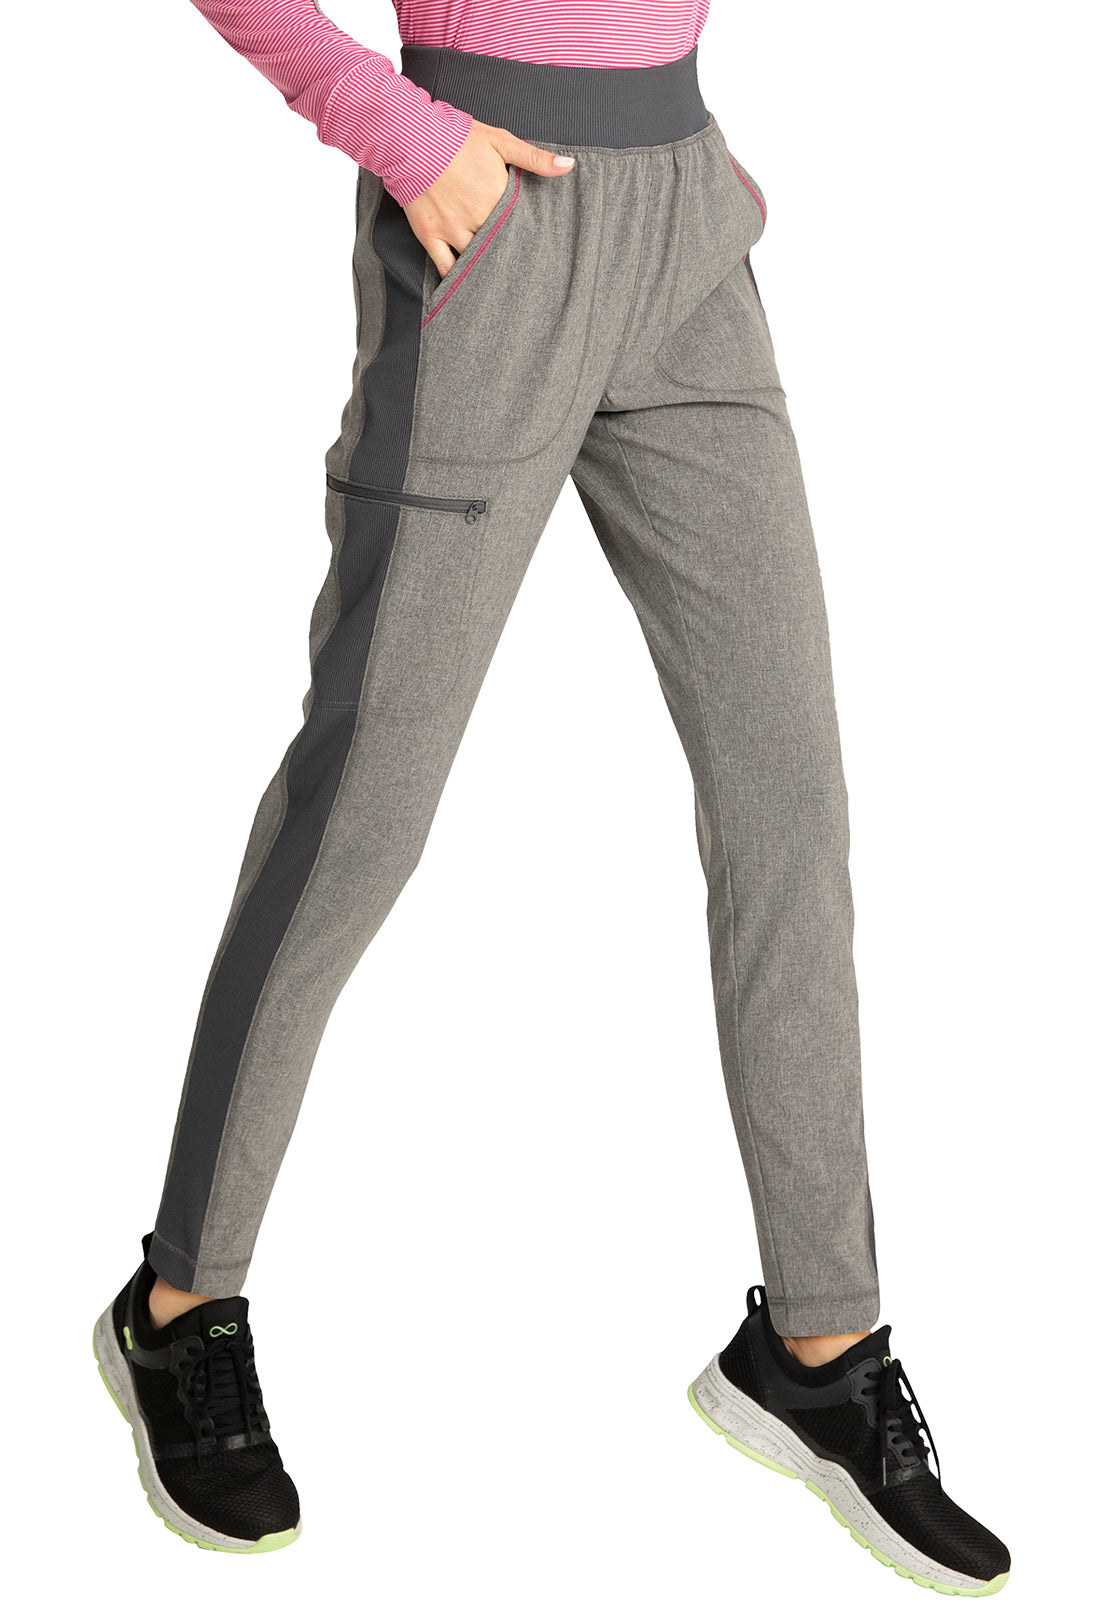 Infinity Mid Rise Skinny Leg Pull-on Pant in Heather Grey